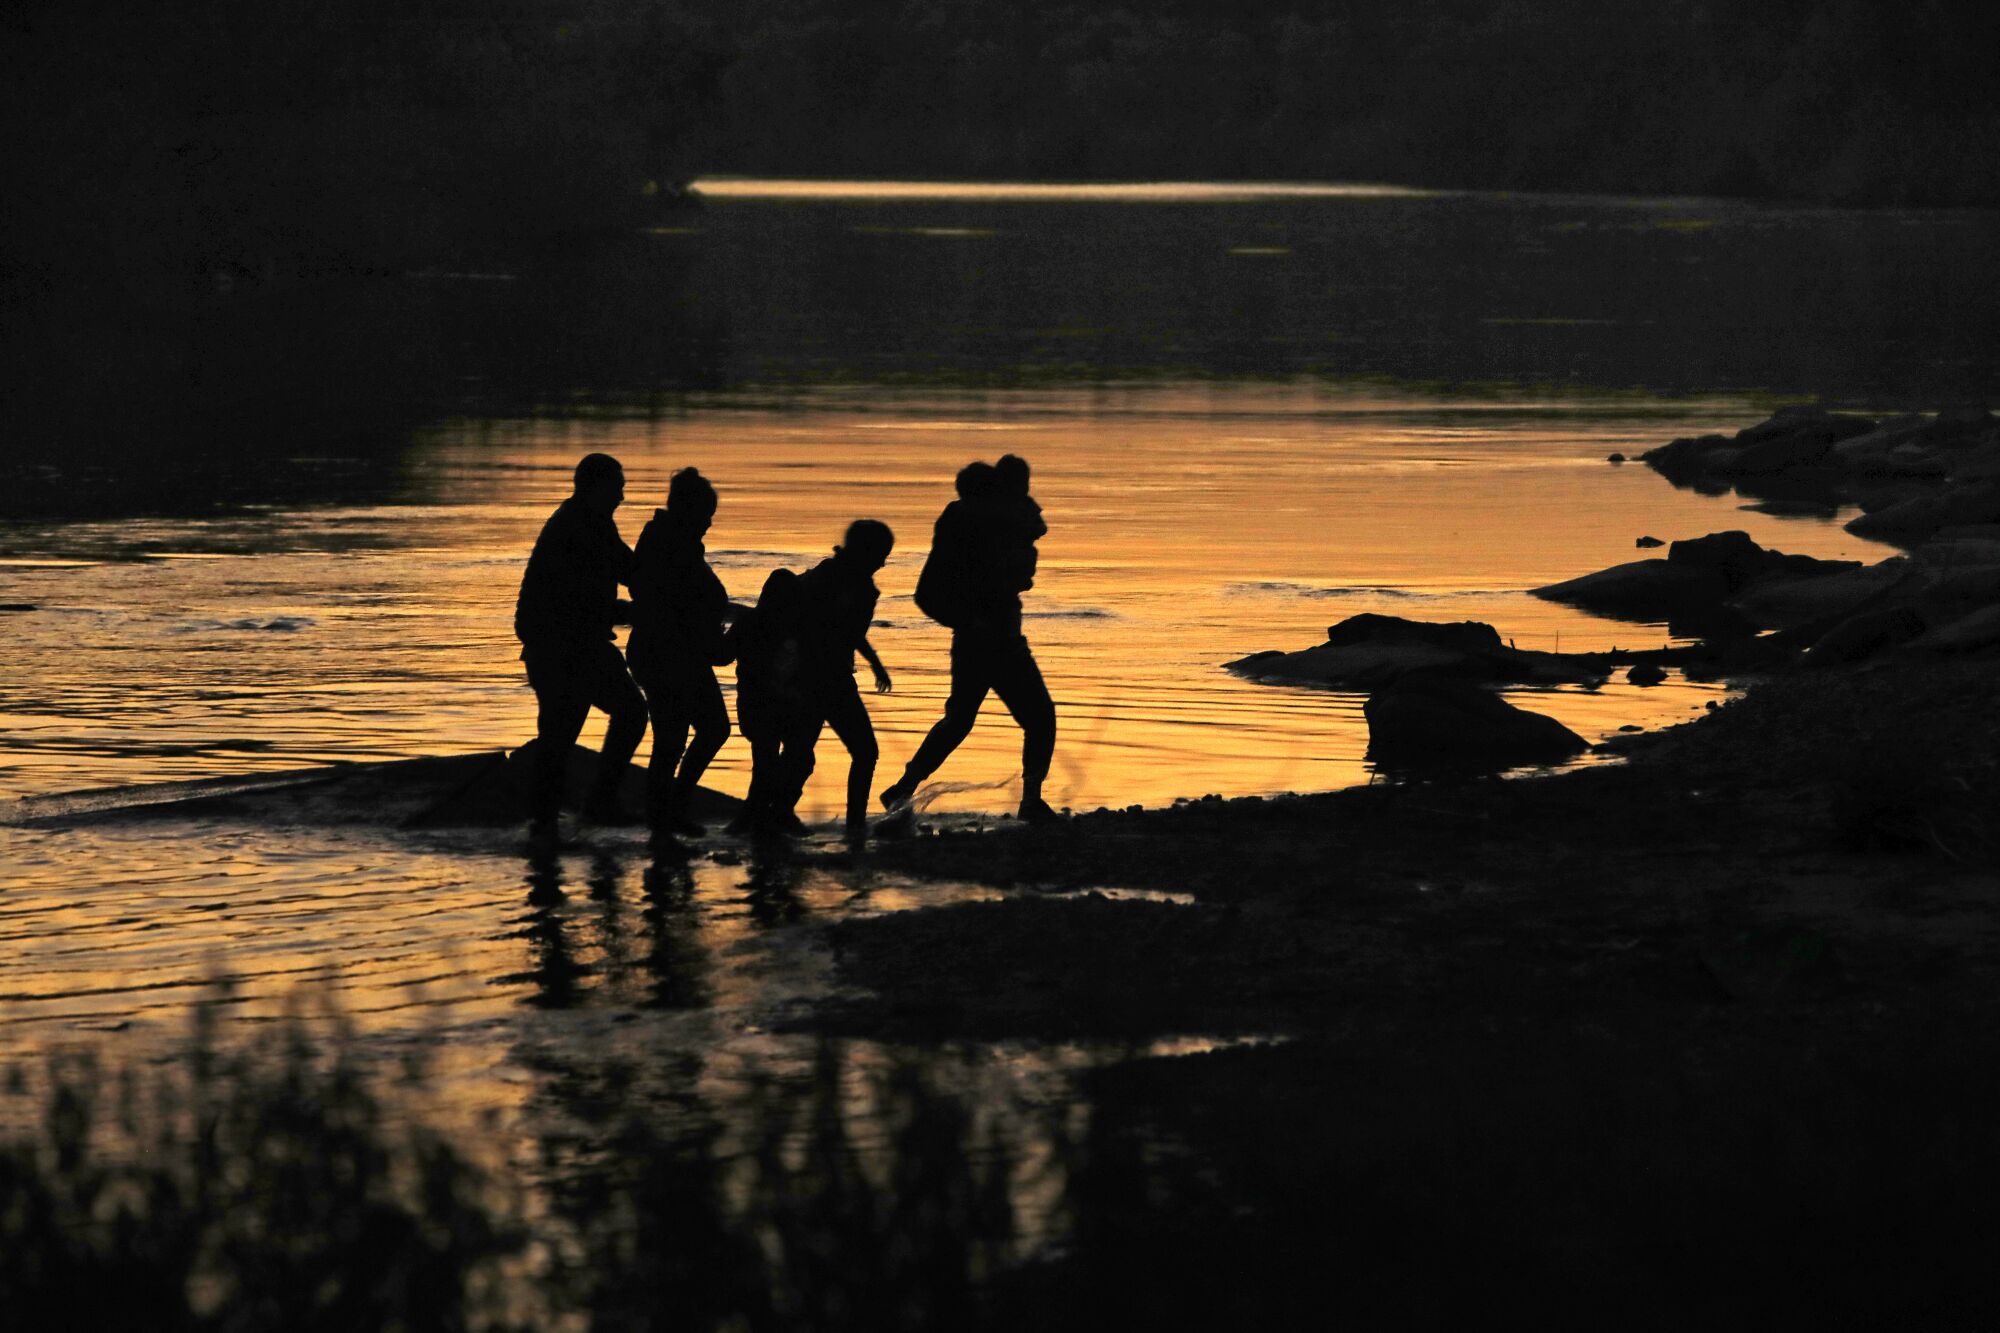 Migrants emerge from the Rio Grande at sunset 